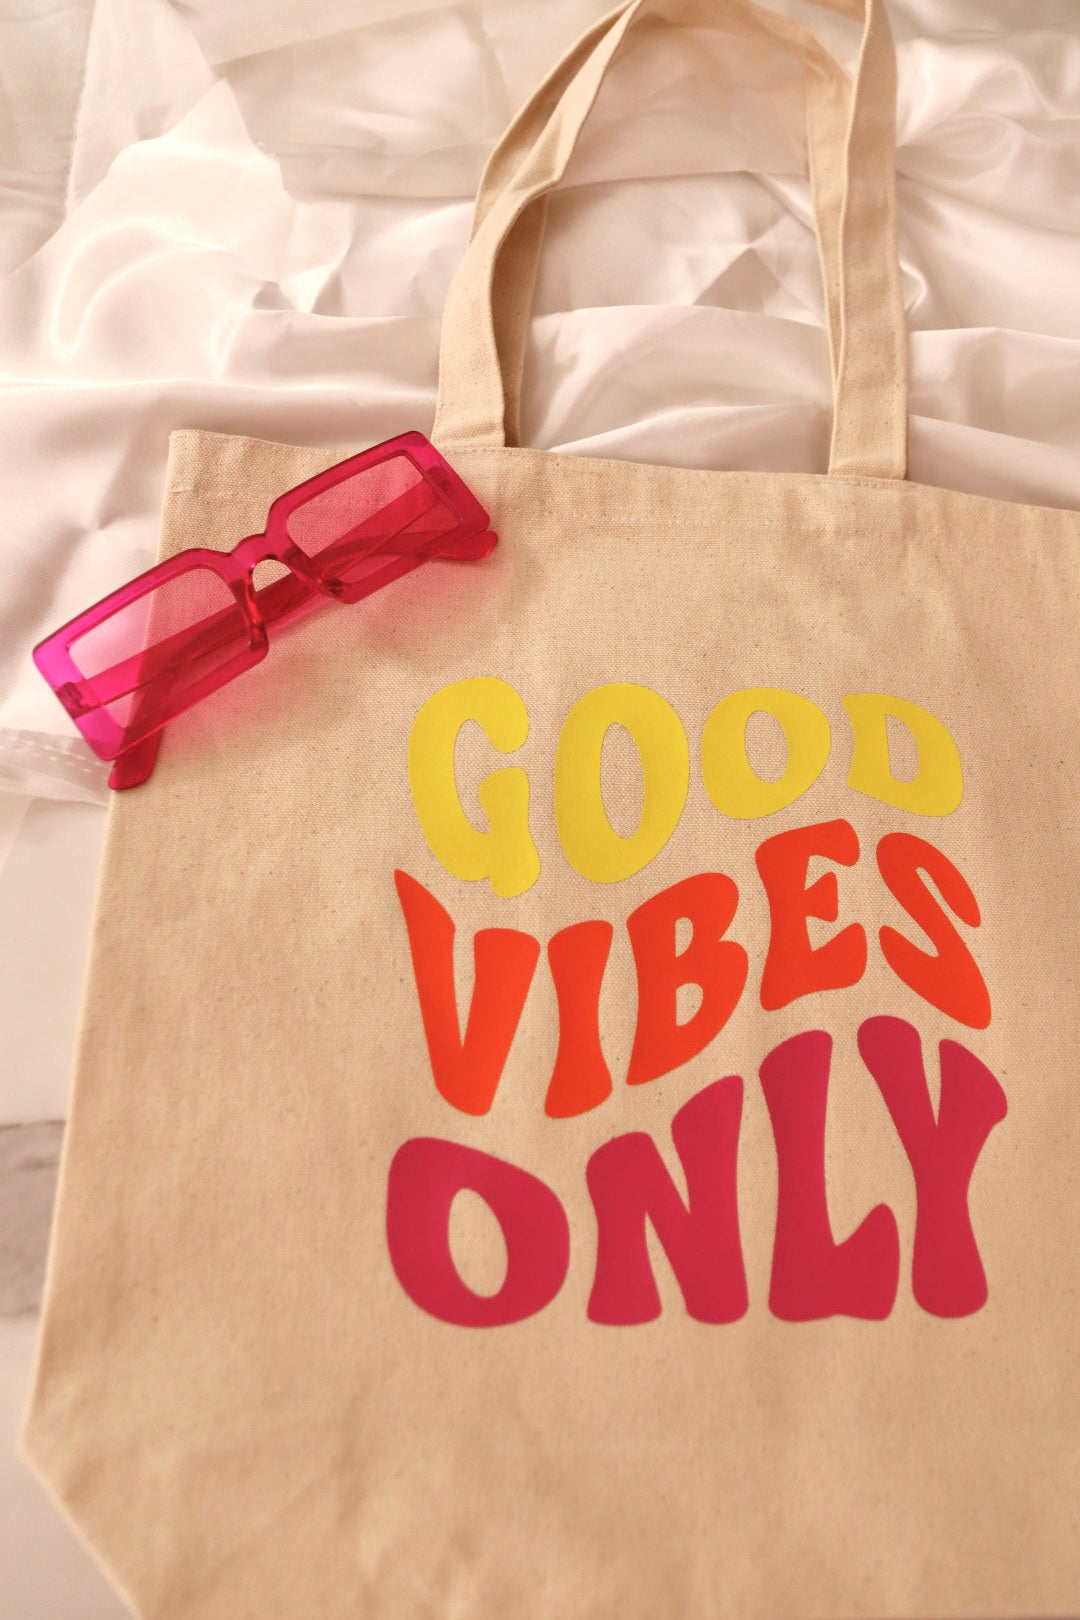 Tote bag “Good Vibes only”